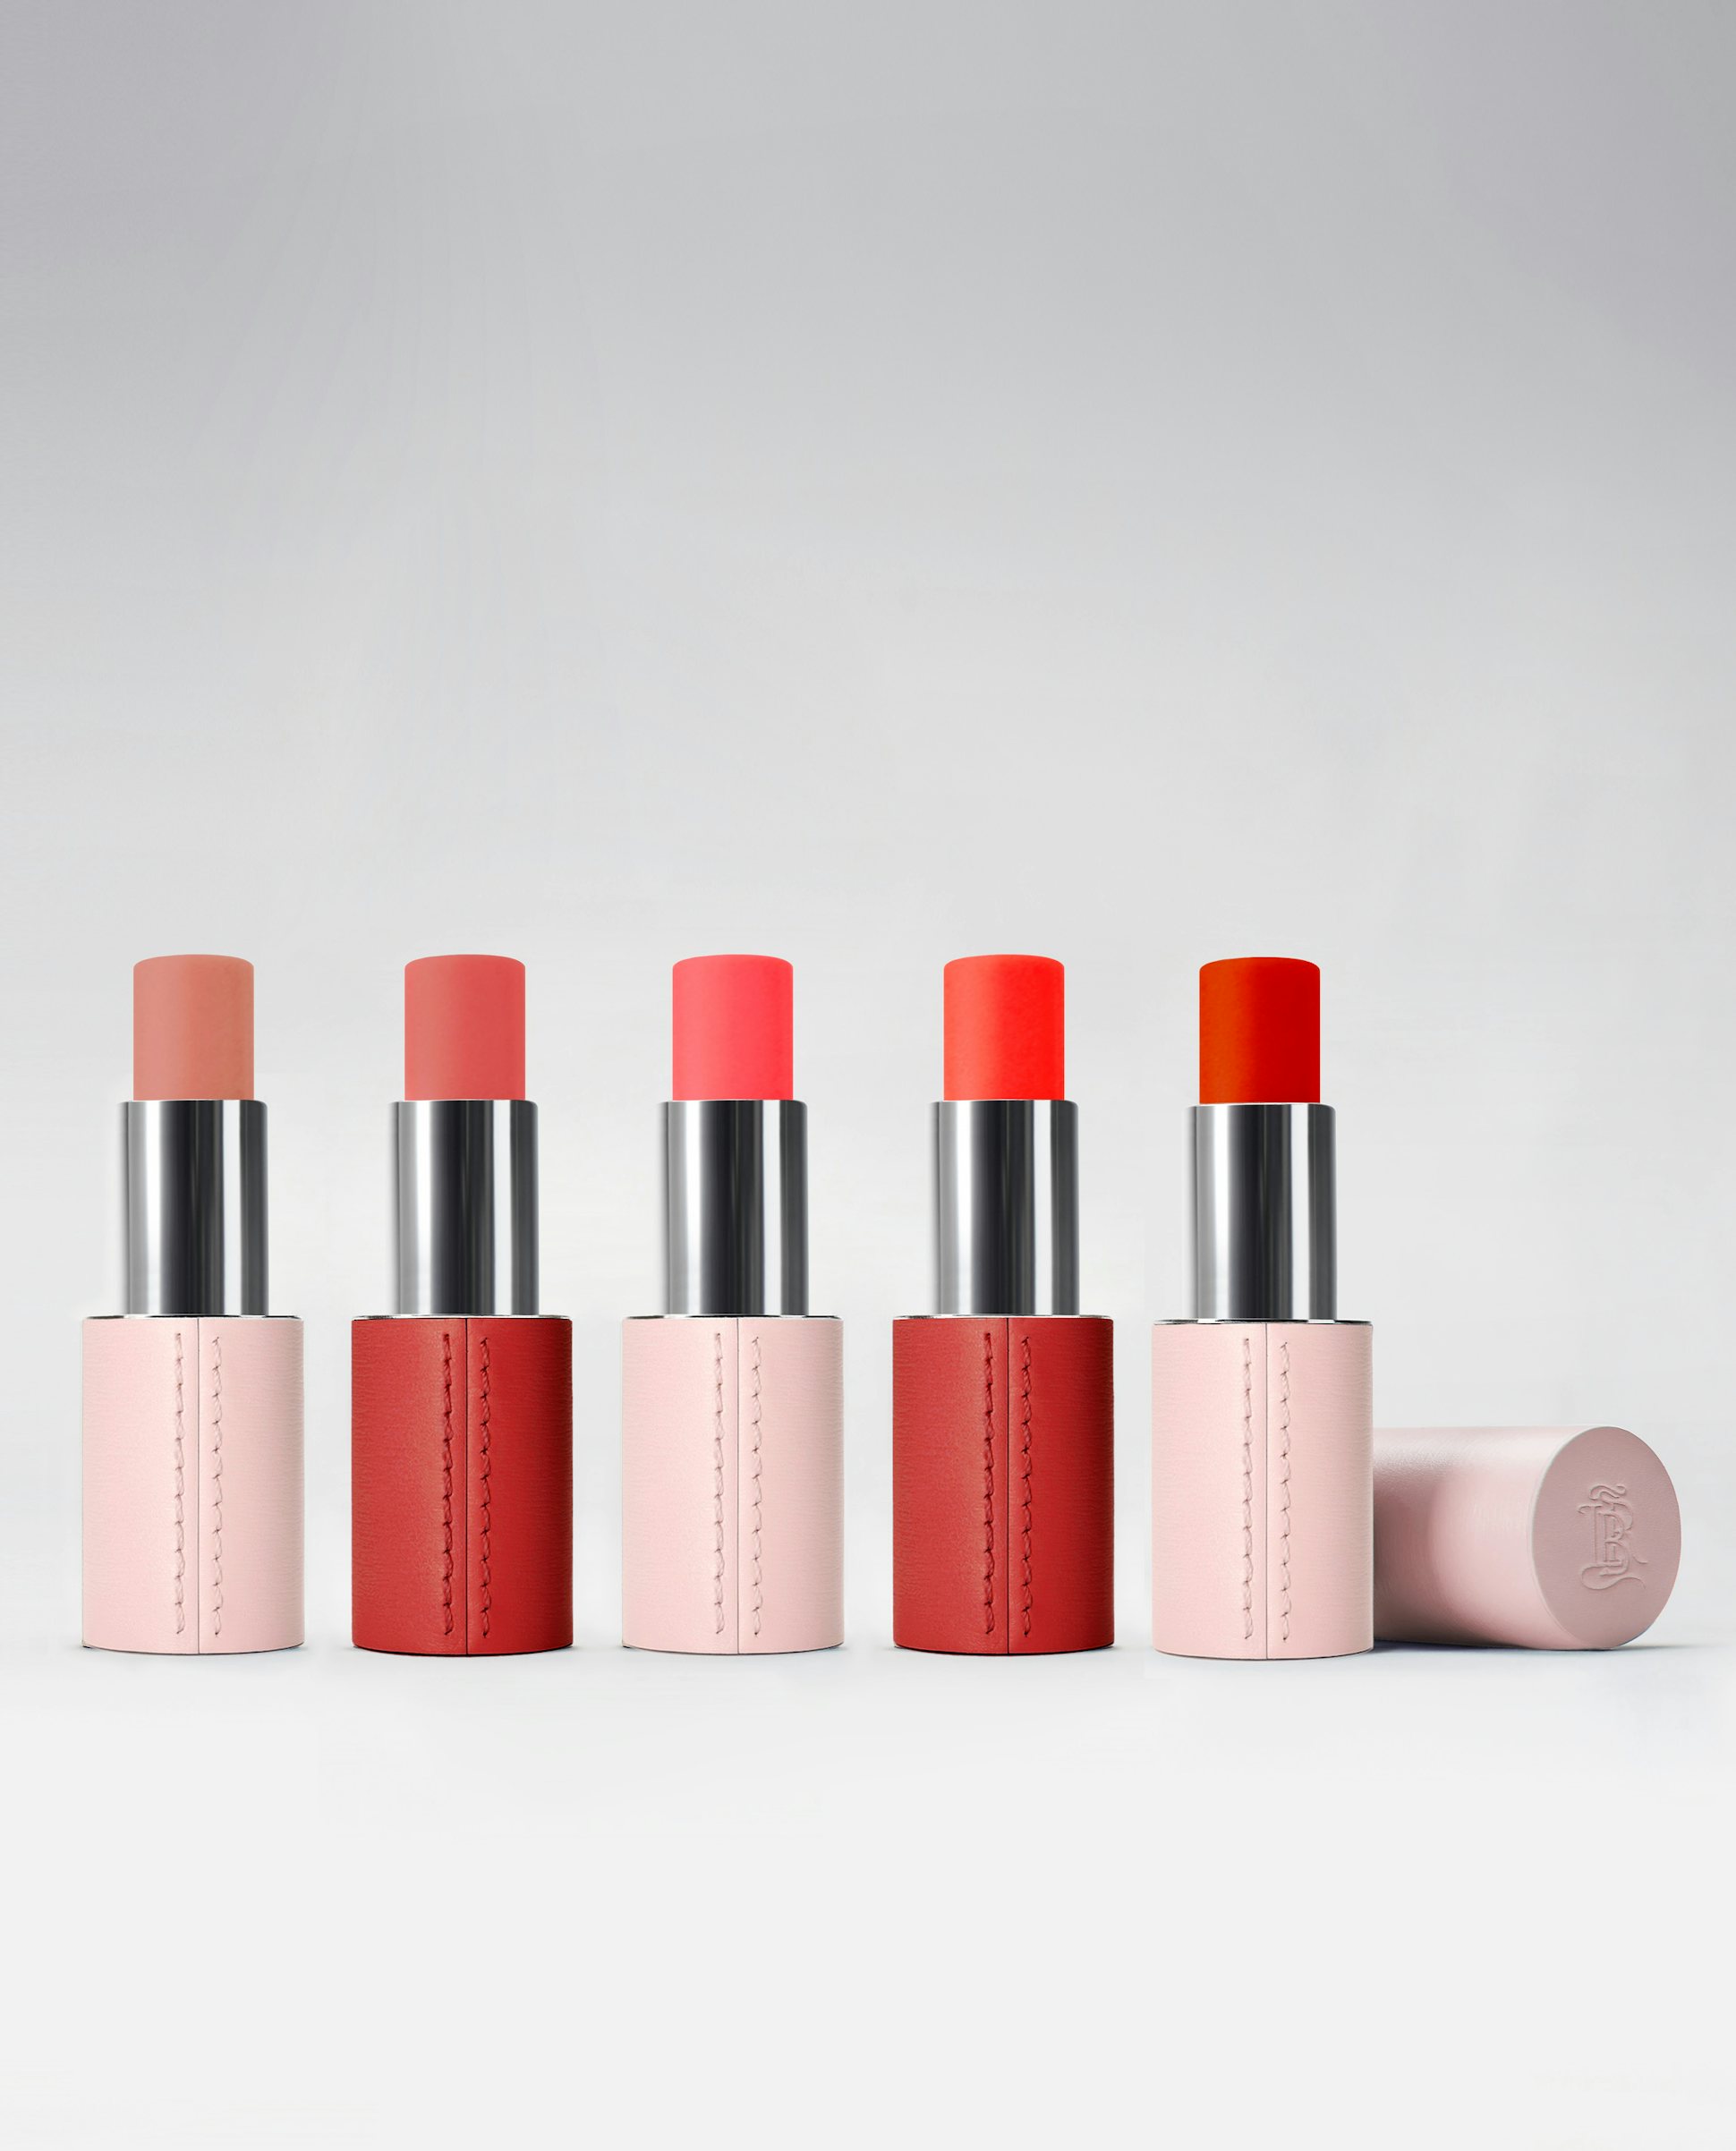 La bouche rouge Blush Sticks in their pink and red leather cases